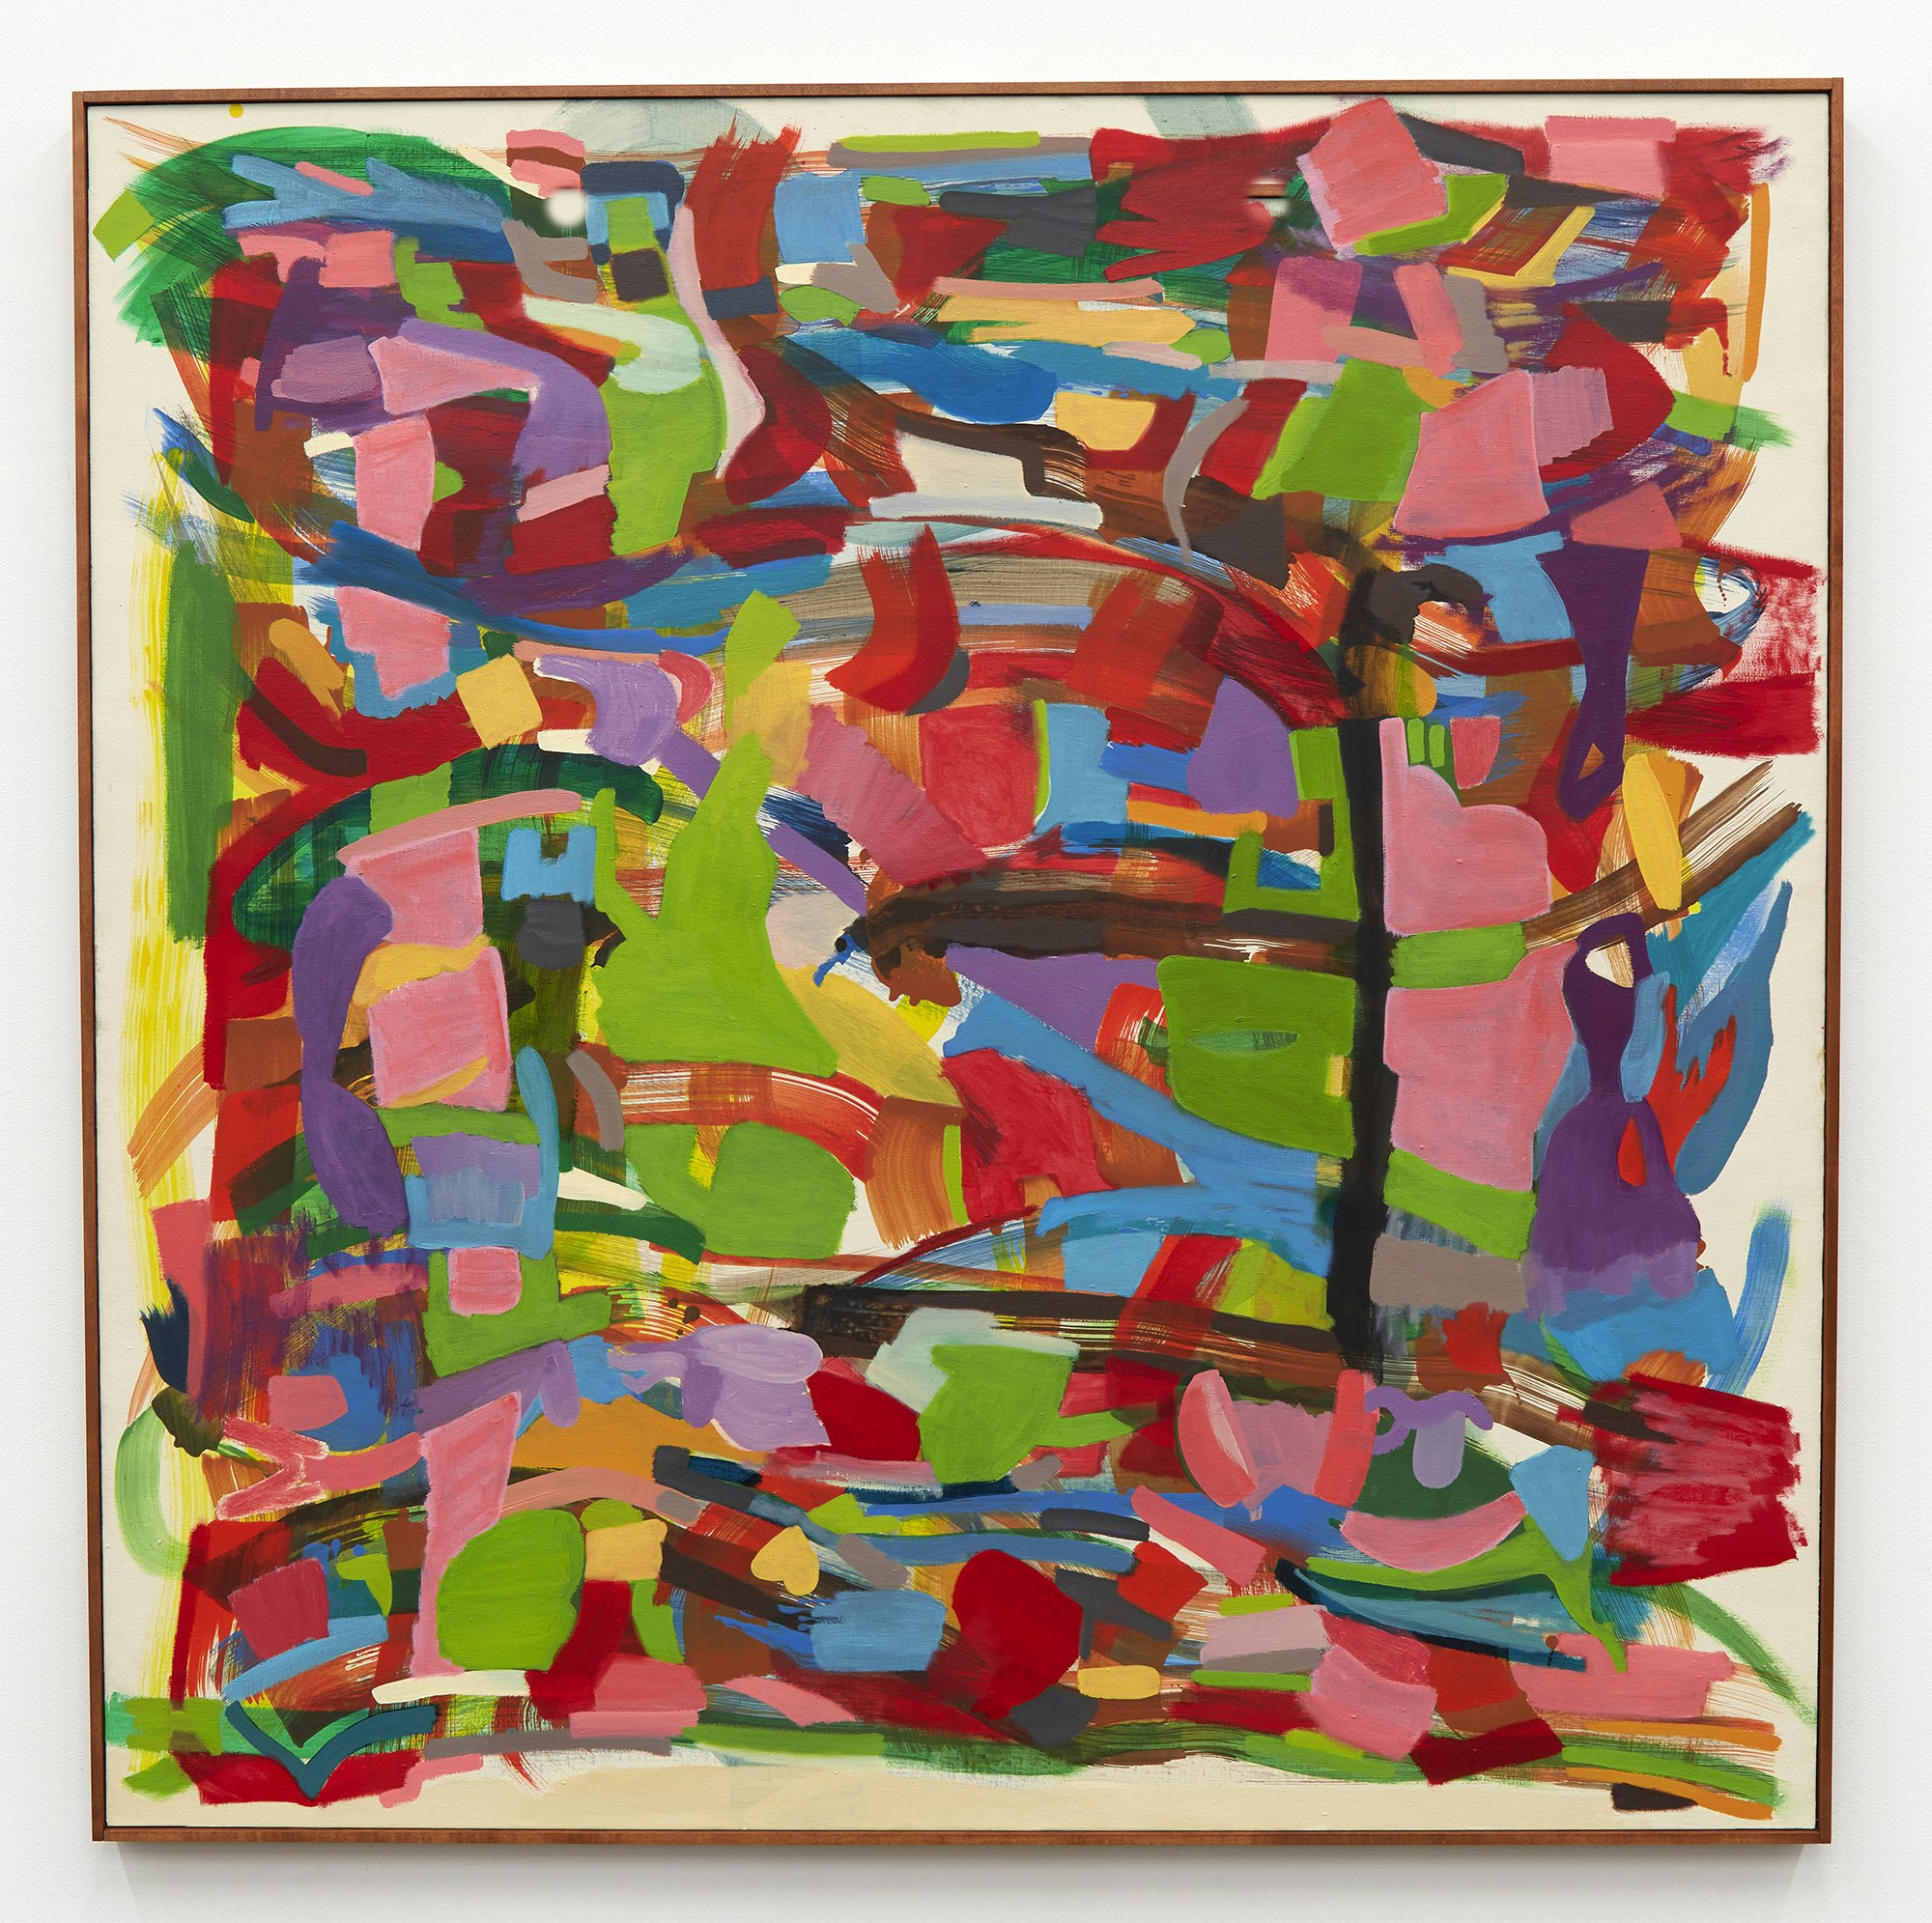 Marley Freeman,<em> ones former other one</em>, 2021. Oil and acrylic on linen, 54 1/8 x 54 1/8 inches. Courtesy Karma, New York.